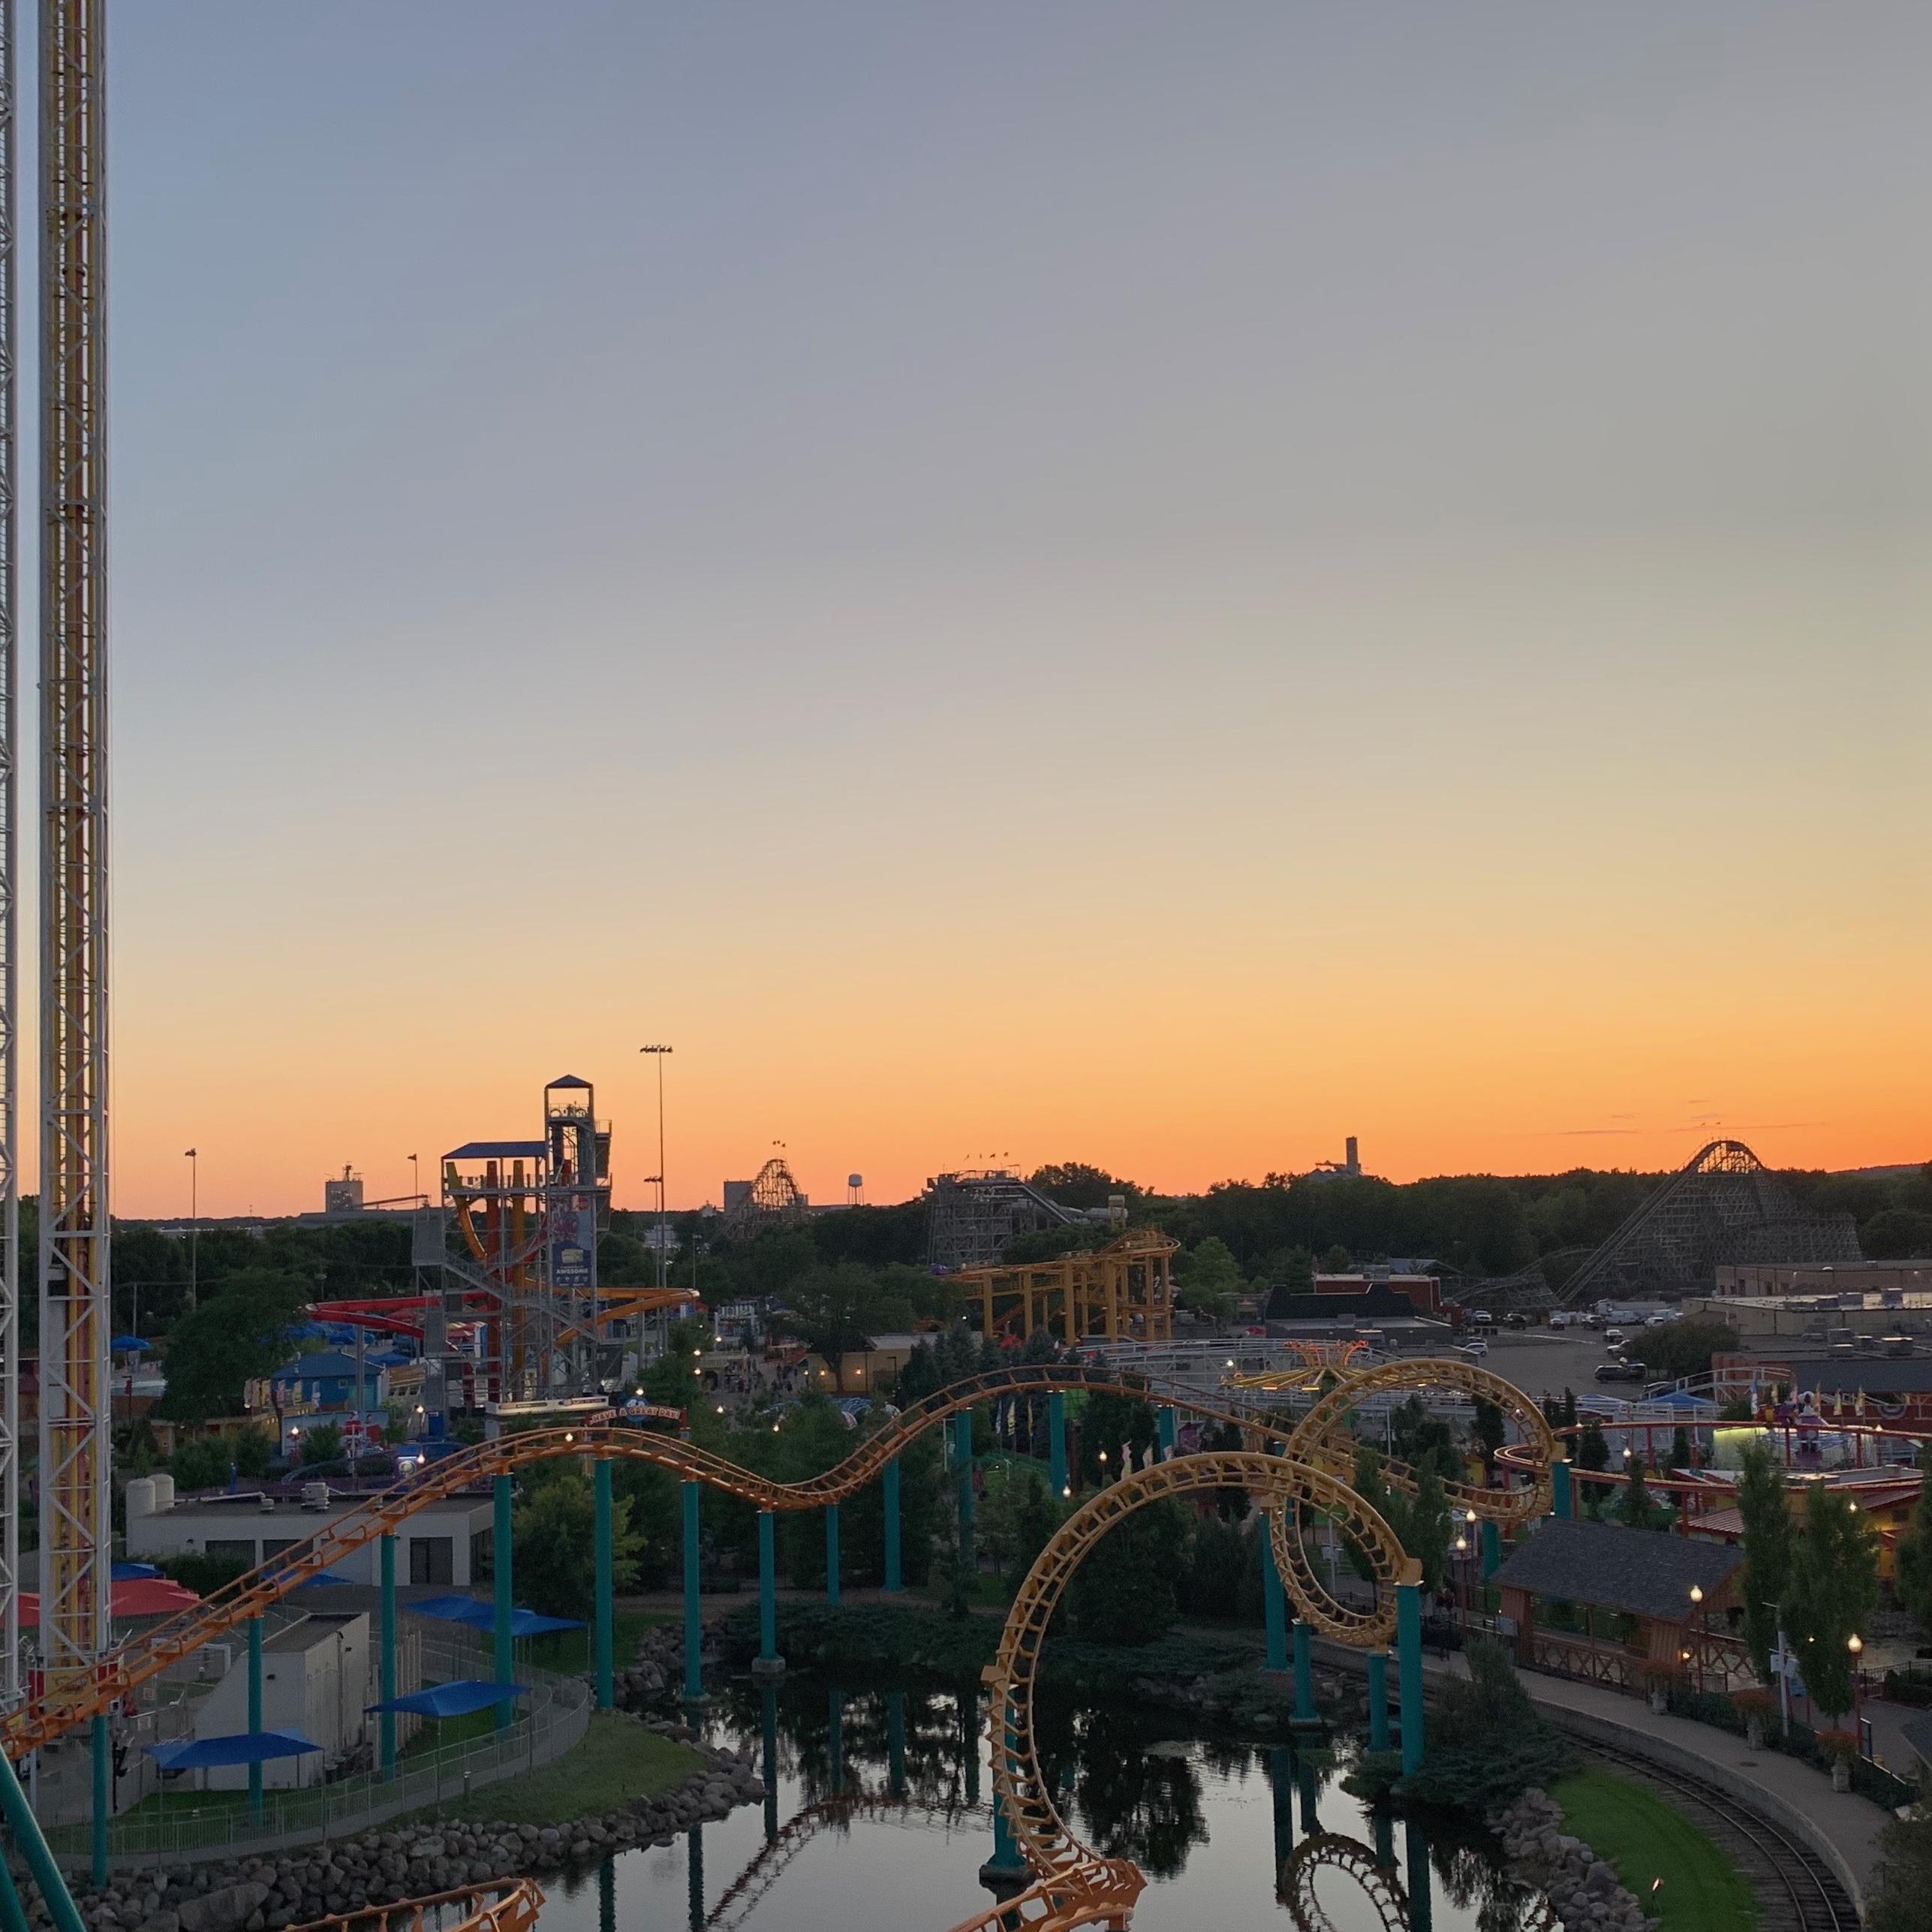 A photo of valley fair rides and theme park